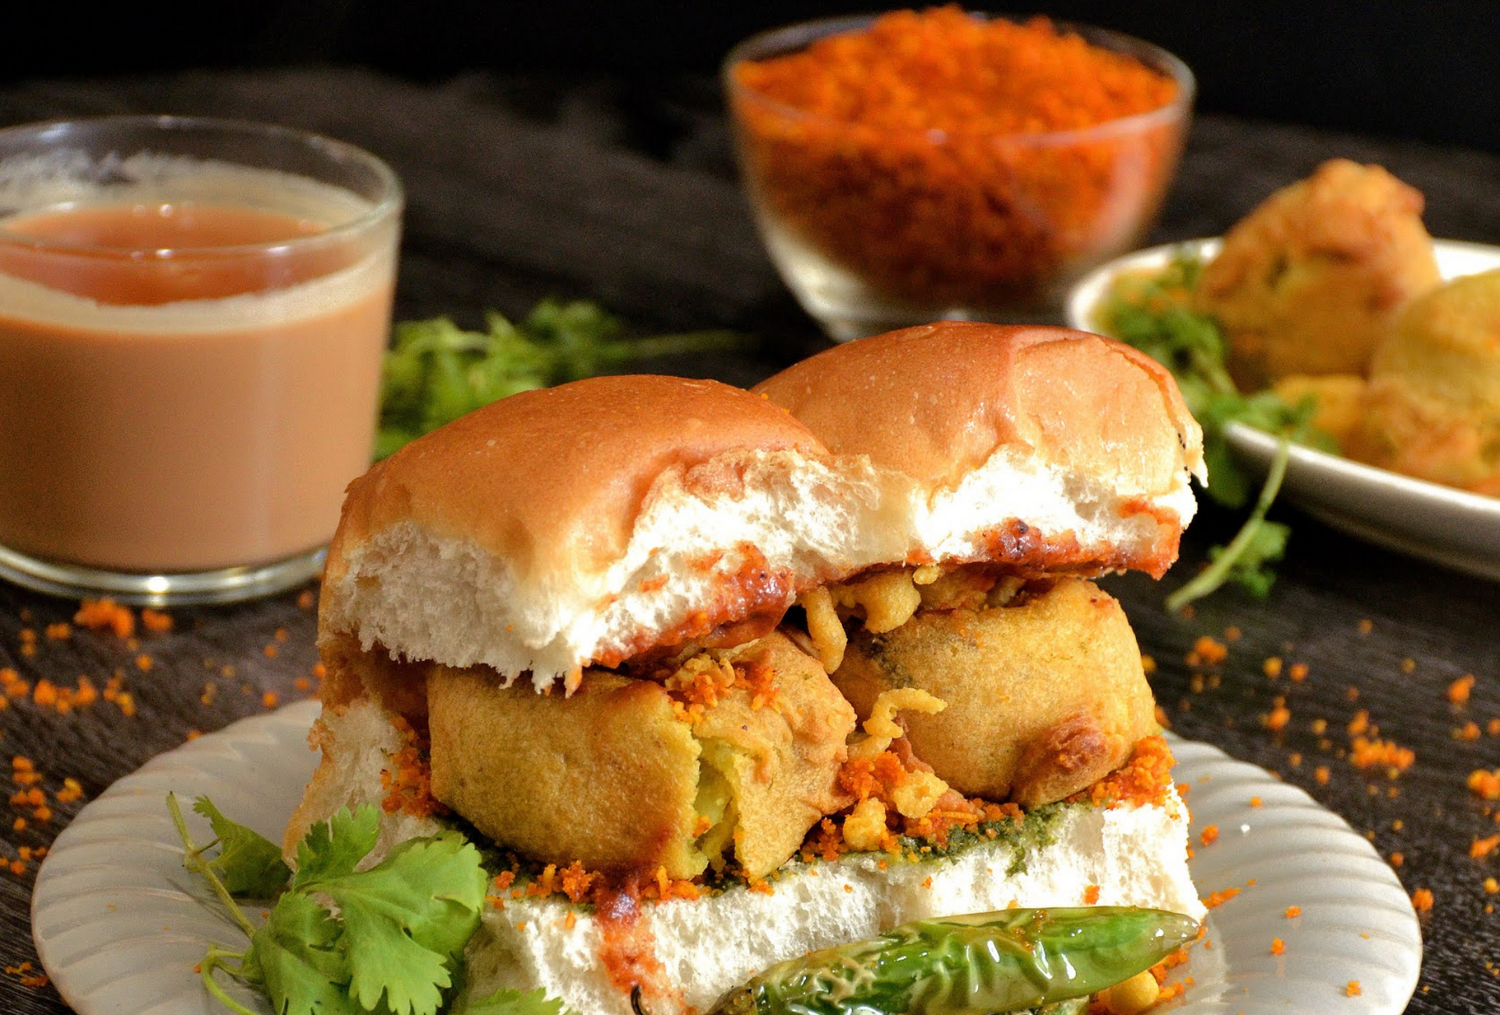 How vada pav helped us deal with being empty-nesters | Aazol